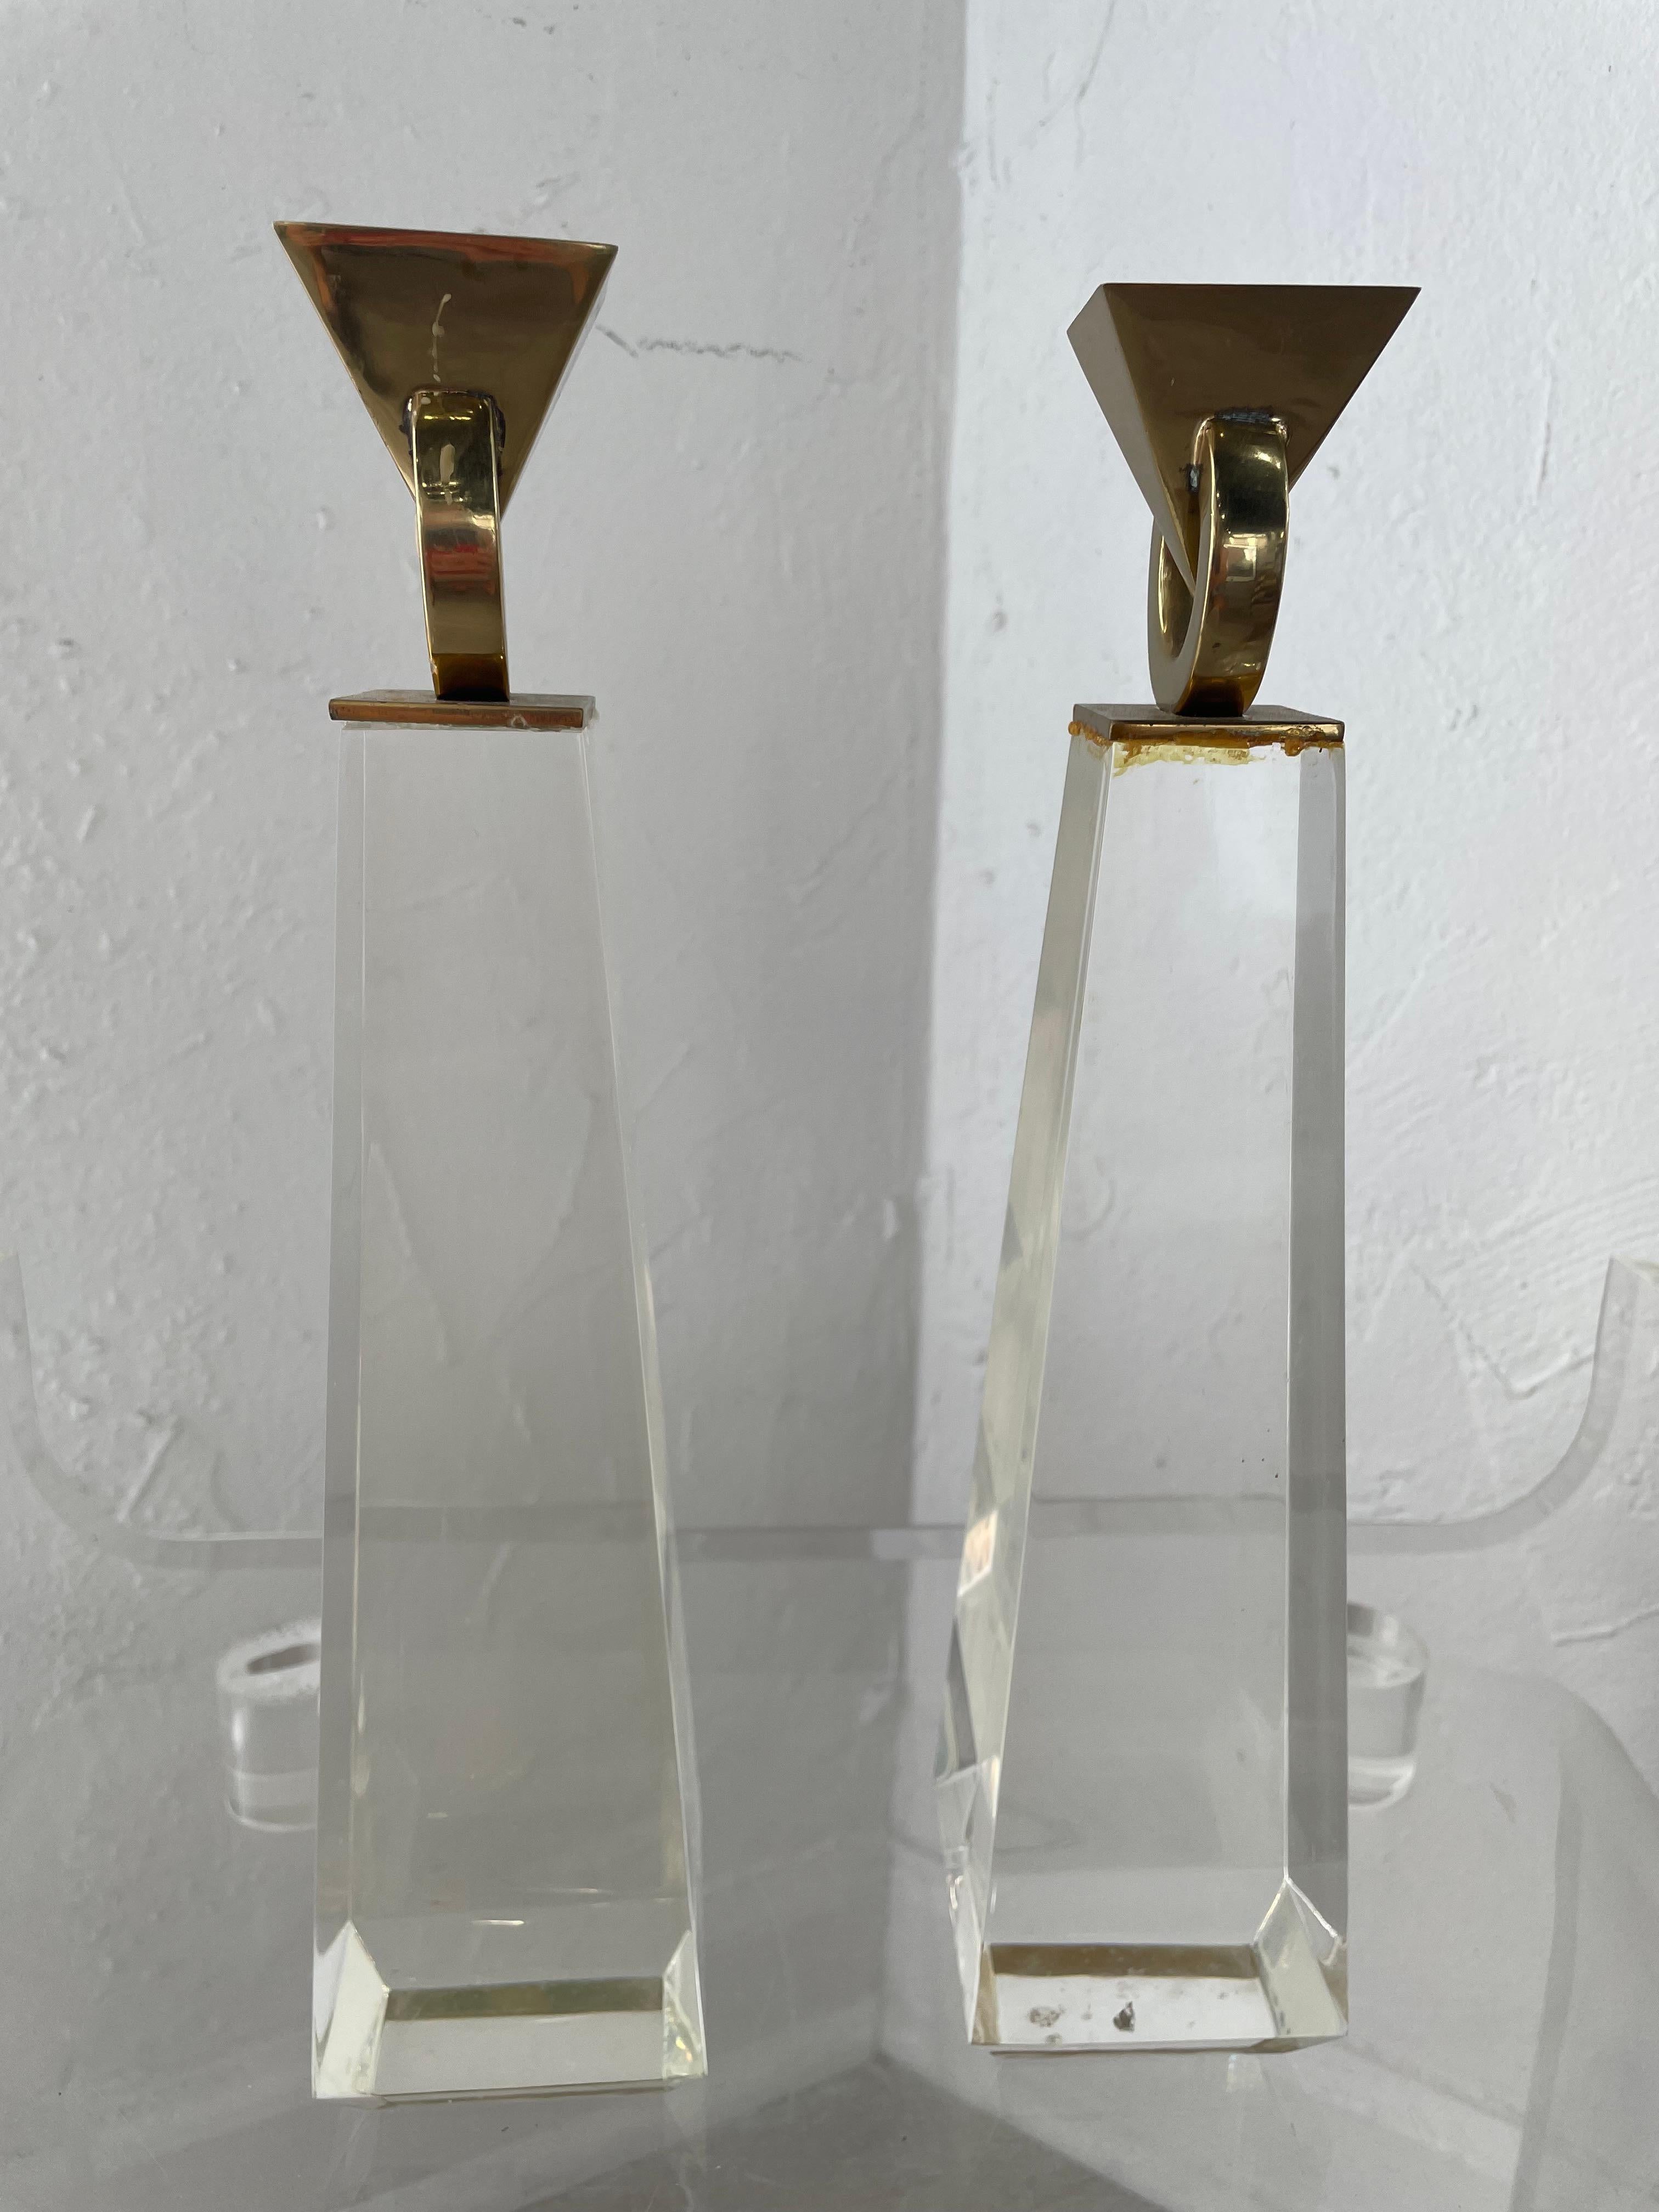 A pair of obelisk-shaped Lucite candlesticks with a modern geometric polished brass top. A combination that makes a retro statement.